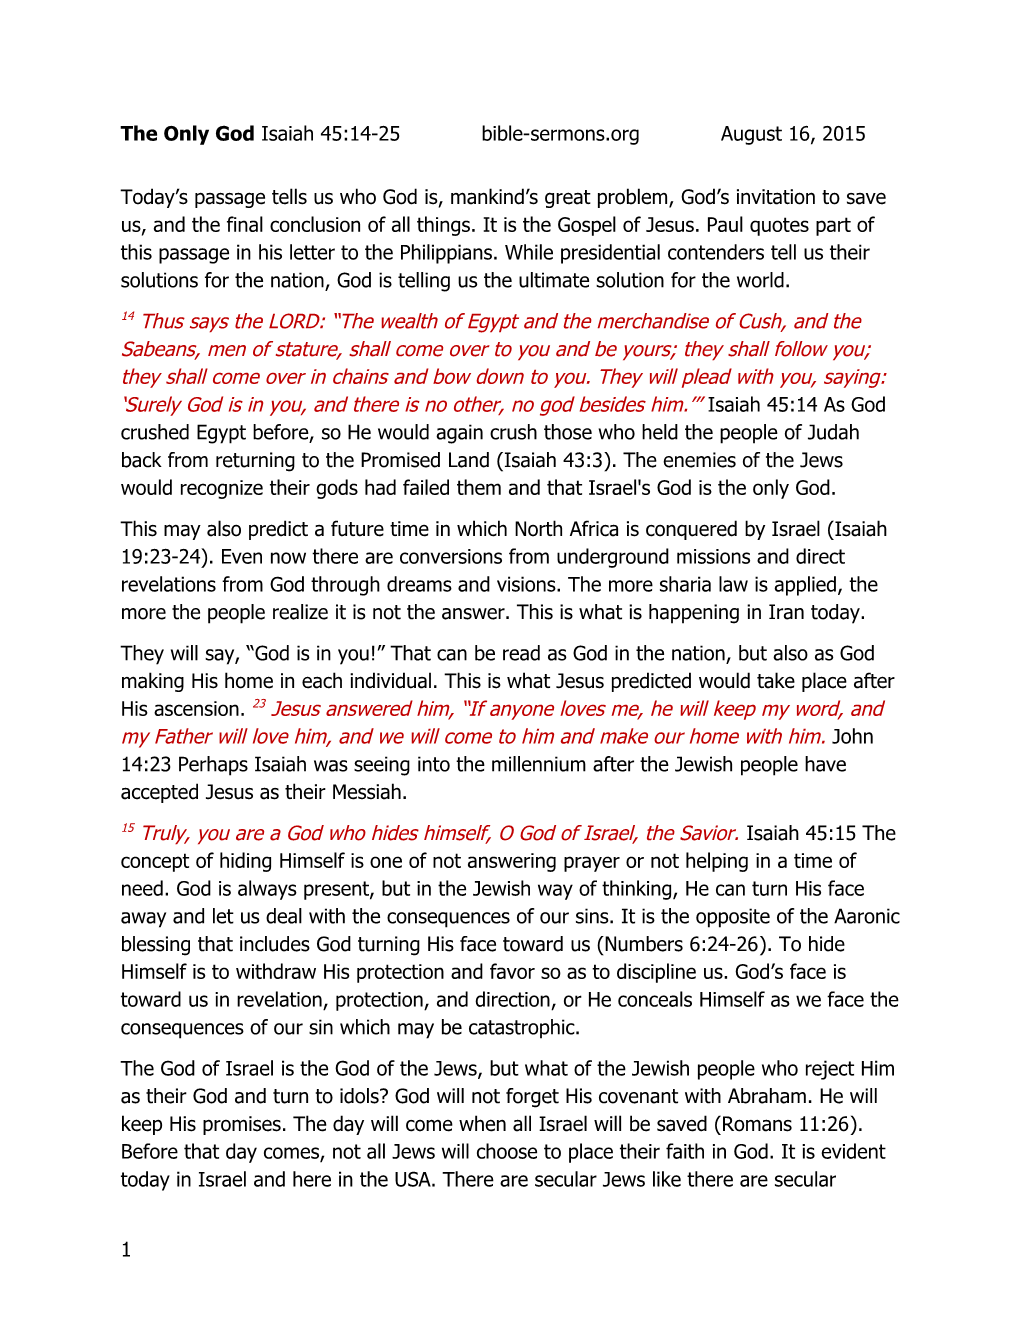 The Only God Isaiah 45:14-25 Bible-Sermons.Org August 16, 2015